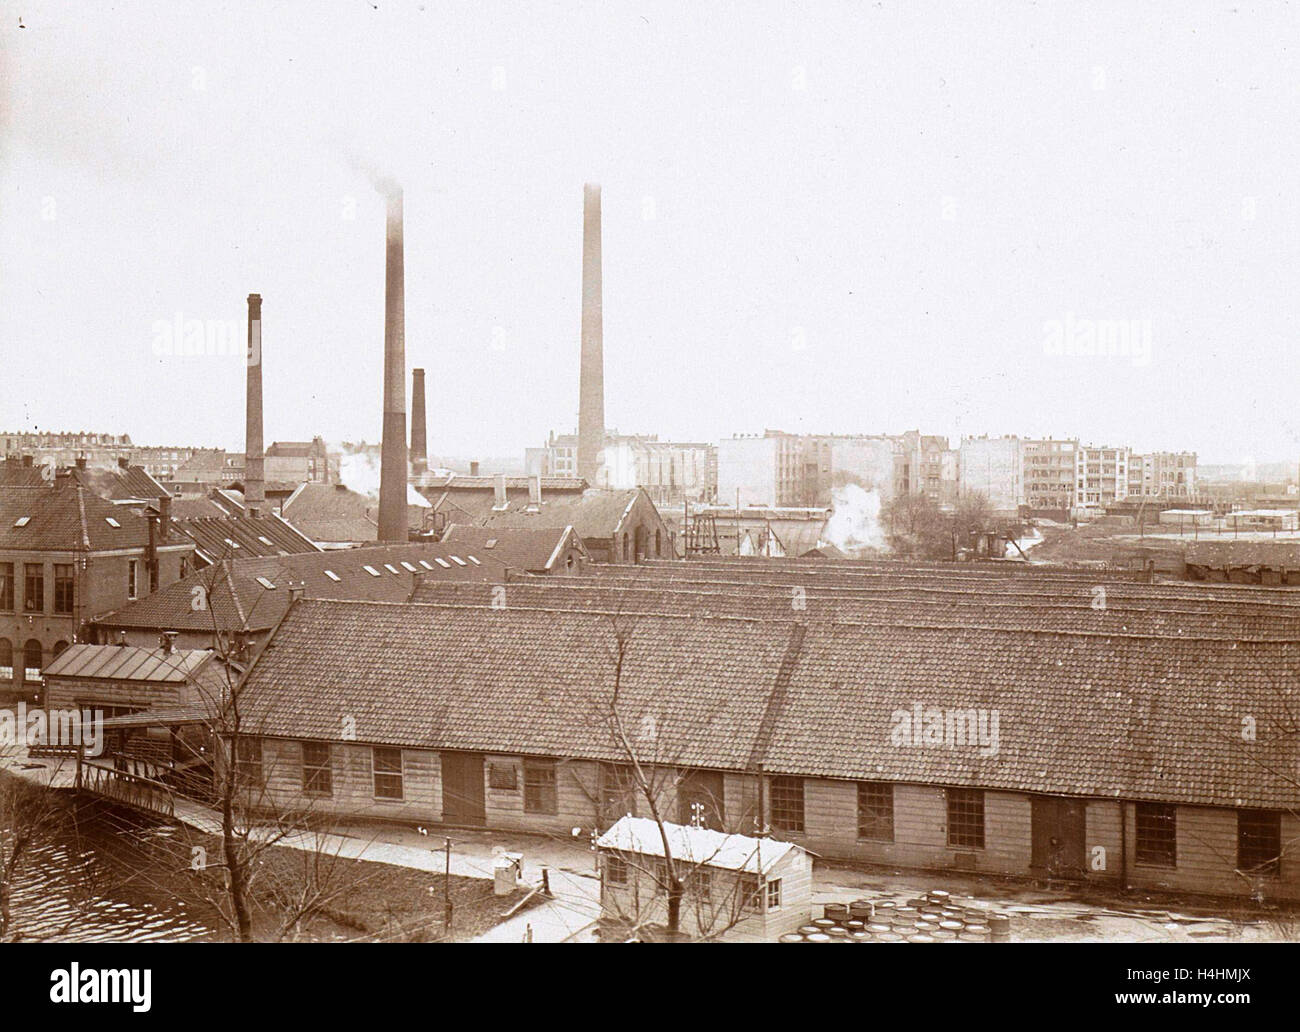 Exterior of factory buildings with chimneys, in the foreground wooden barrels, Anonymous, c. 1900 - c. 1910 Stock Photo